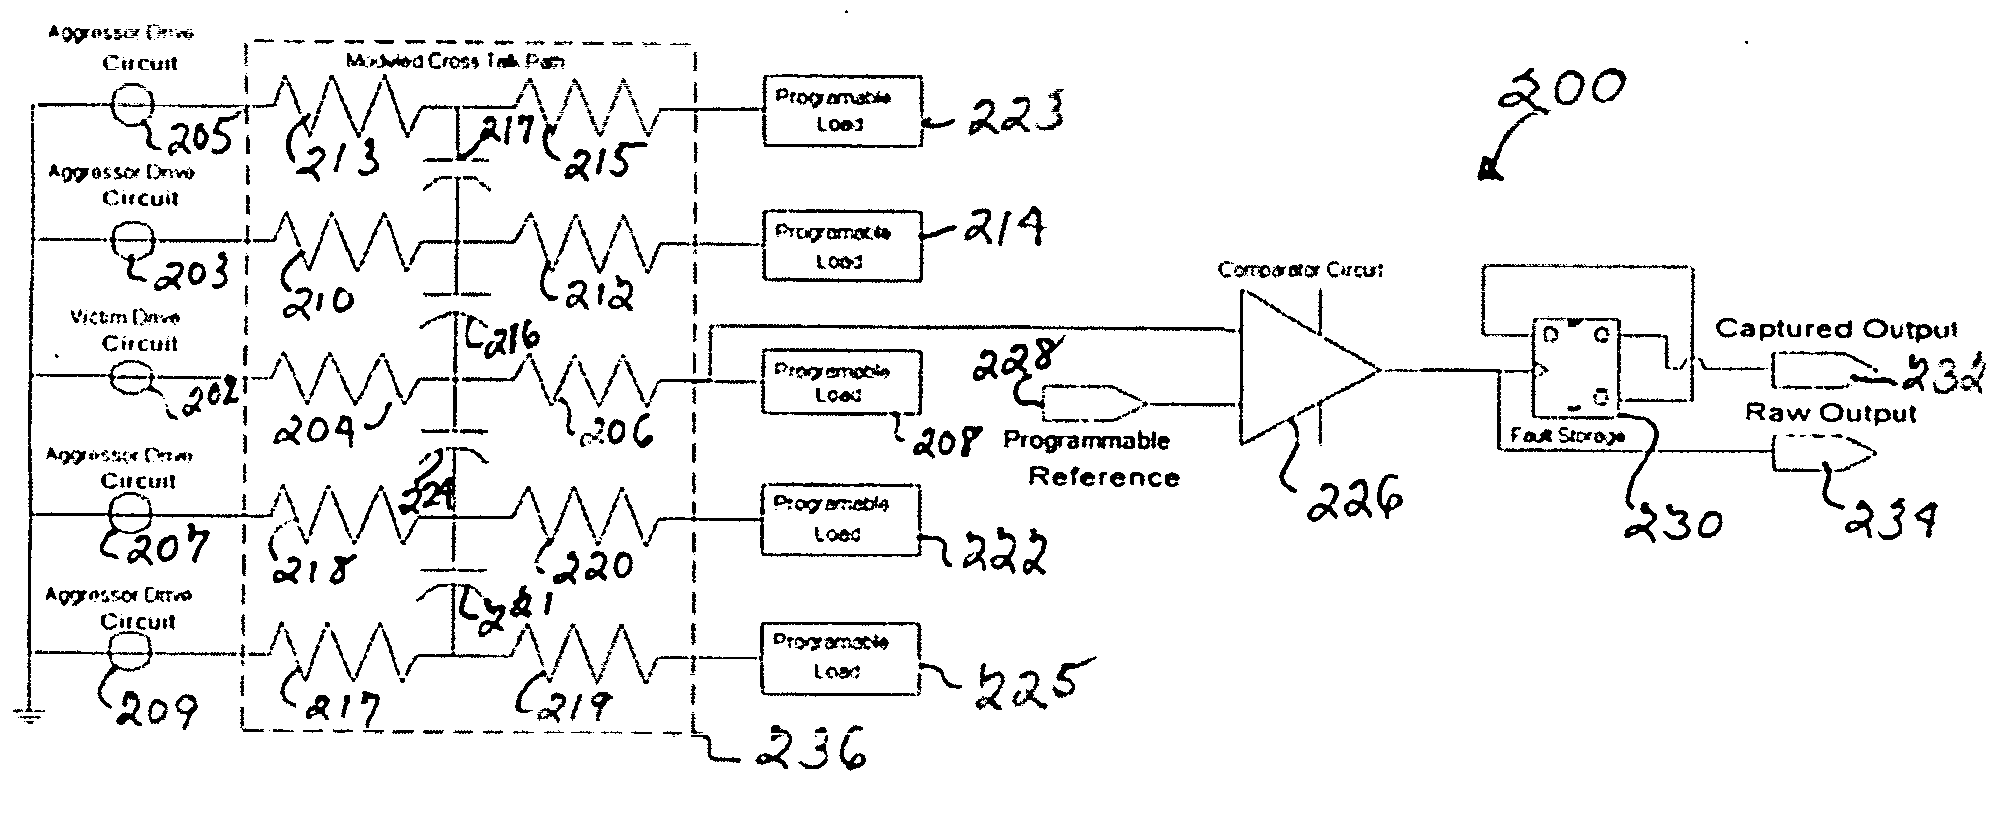 System and method for signal integrity testing of electronic circuits